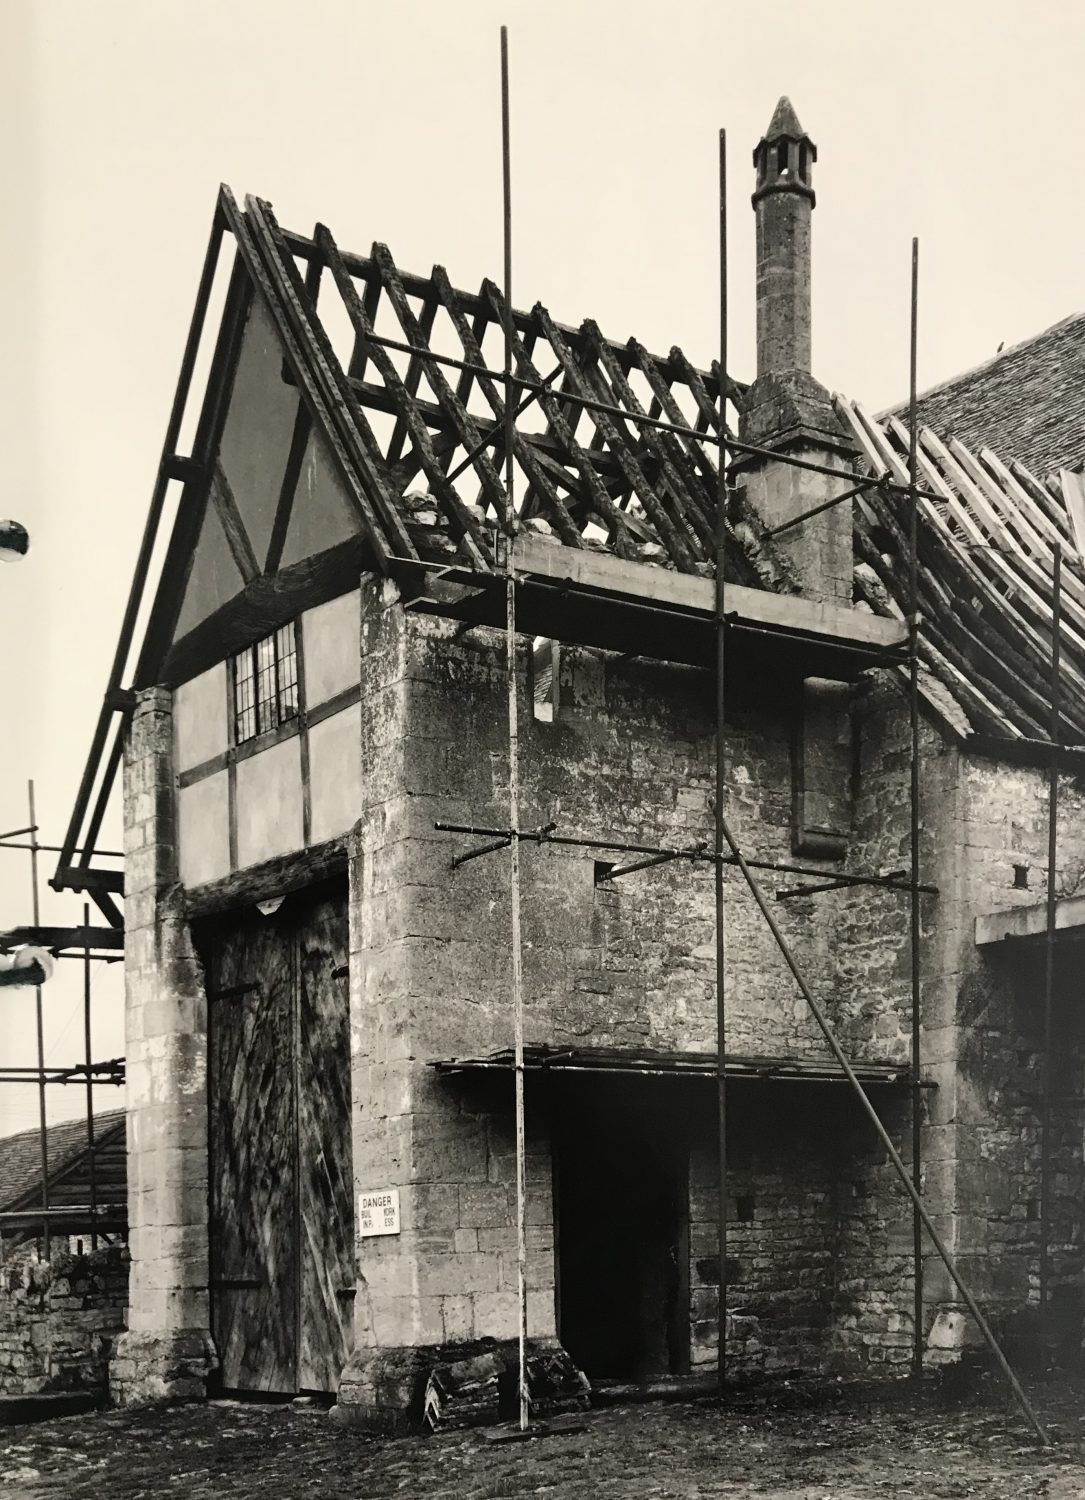 Scaffolding on one of Bredon's Barn's two large porches. Note the bailiff's solar room over the porch and fine medieval stone chimney with conical roof